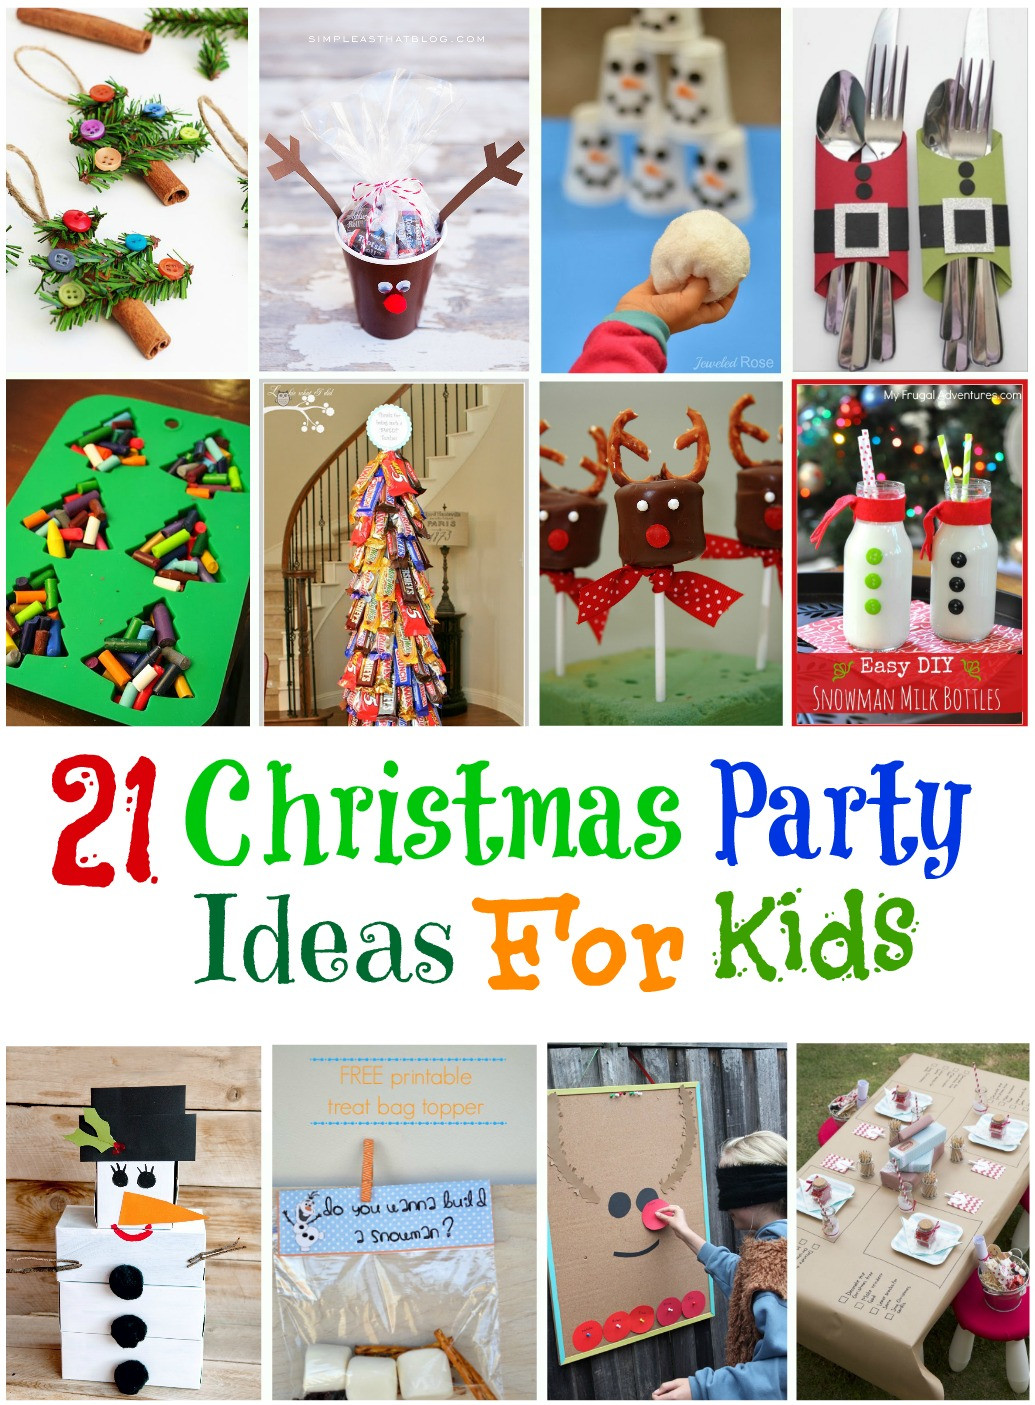 Kindergarten Christmas Party Ideas
 21 Amazing Christmas Party Ideas for Kids